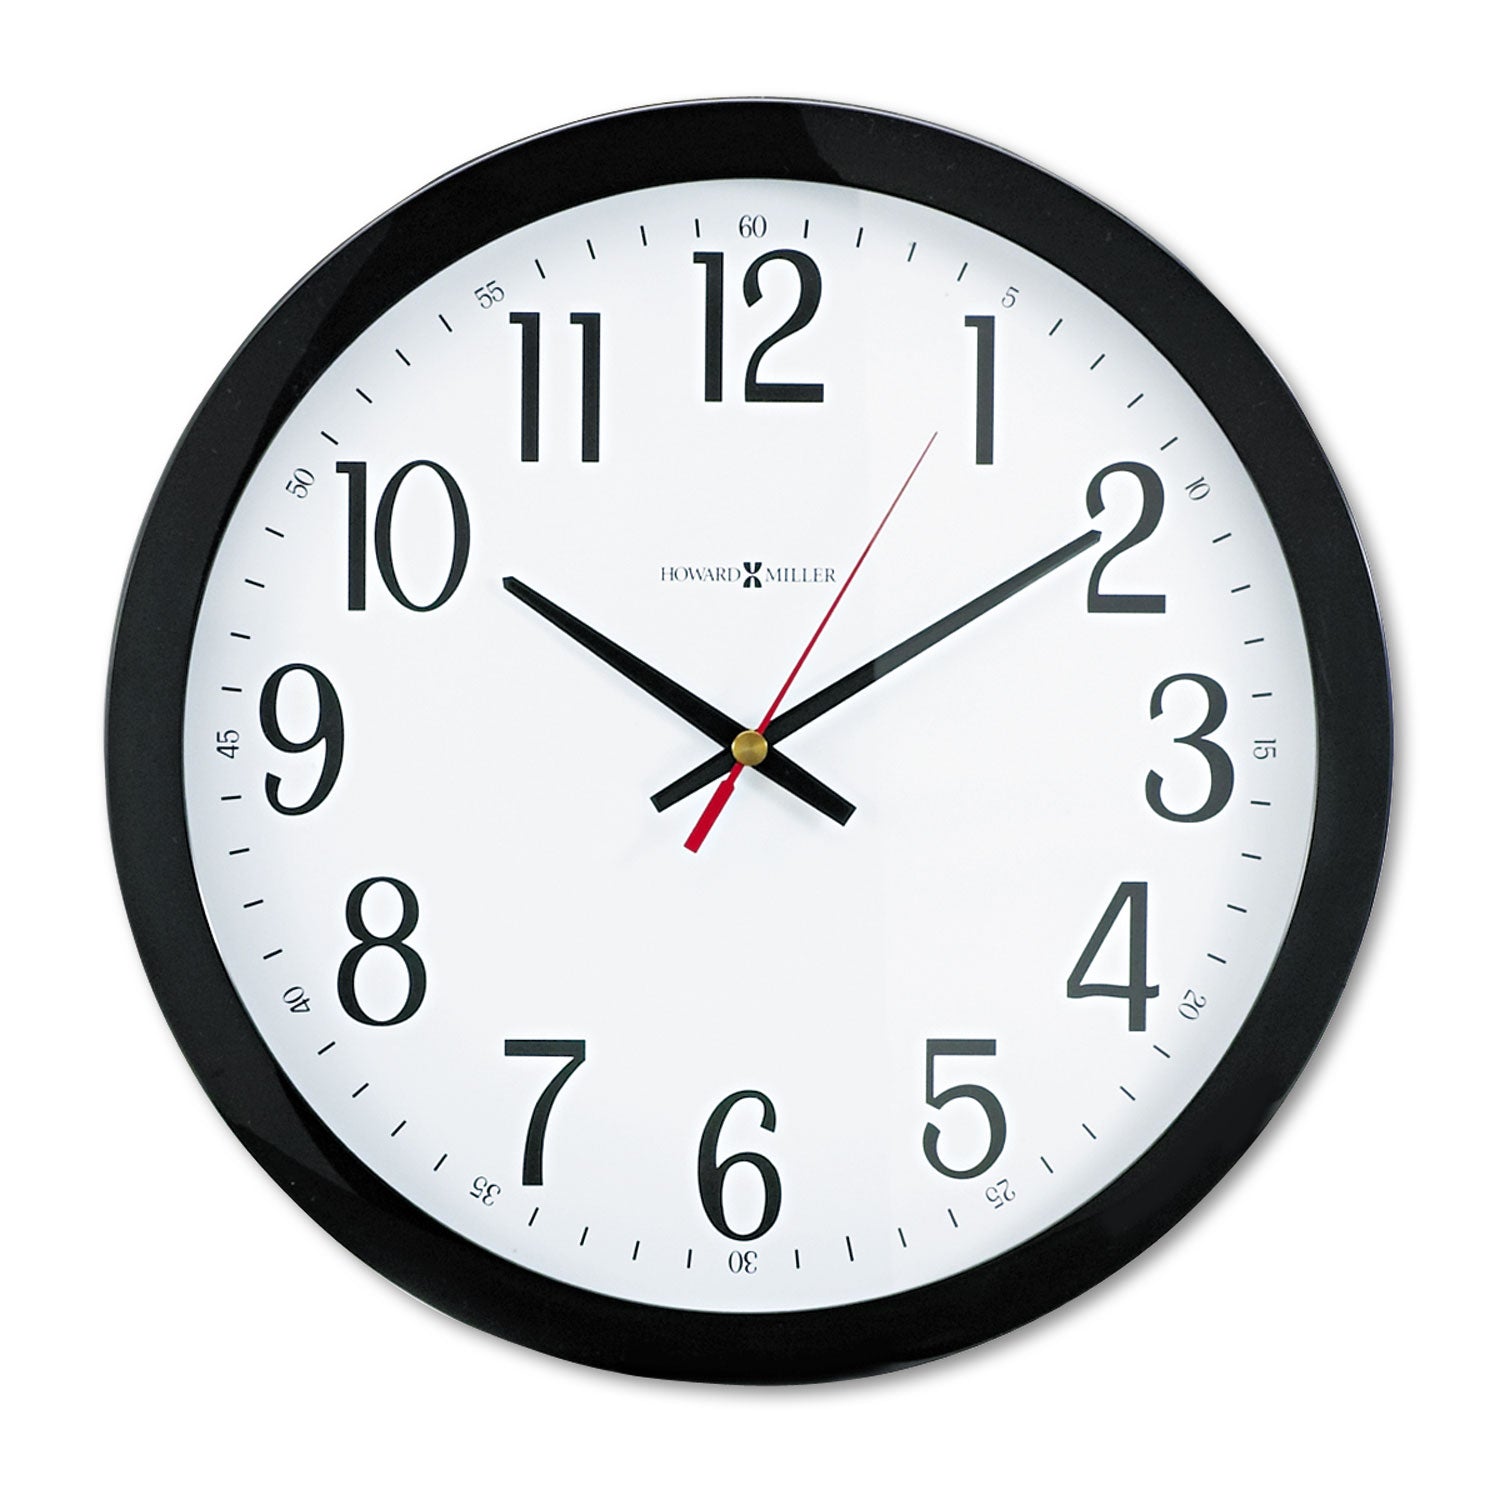 Gallery Wall Clock, 16" Overall Diameter, Black Case, 1 AA (sold separately) - 